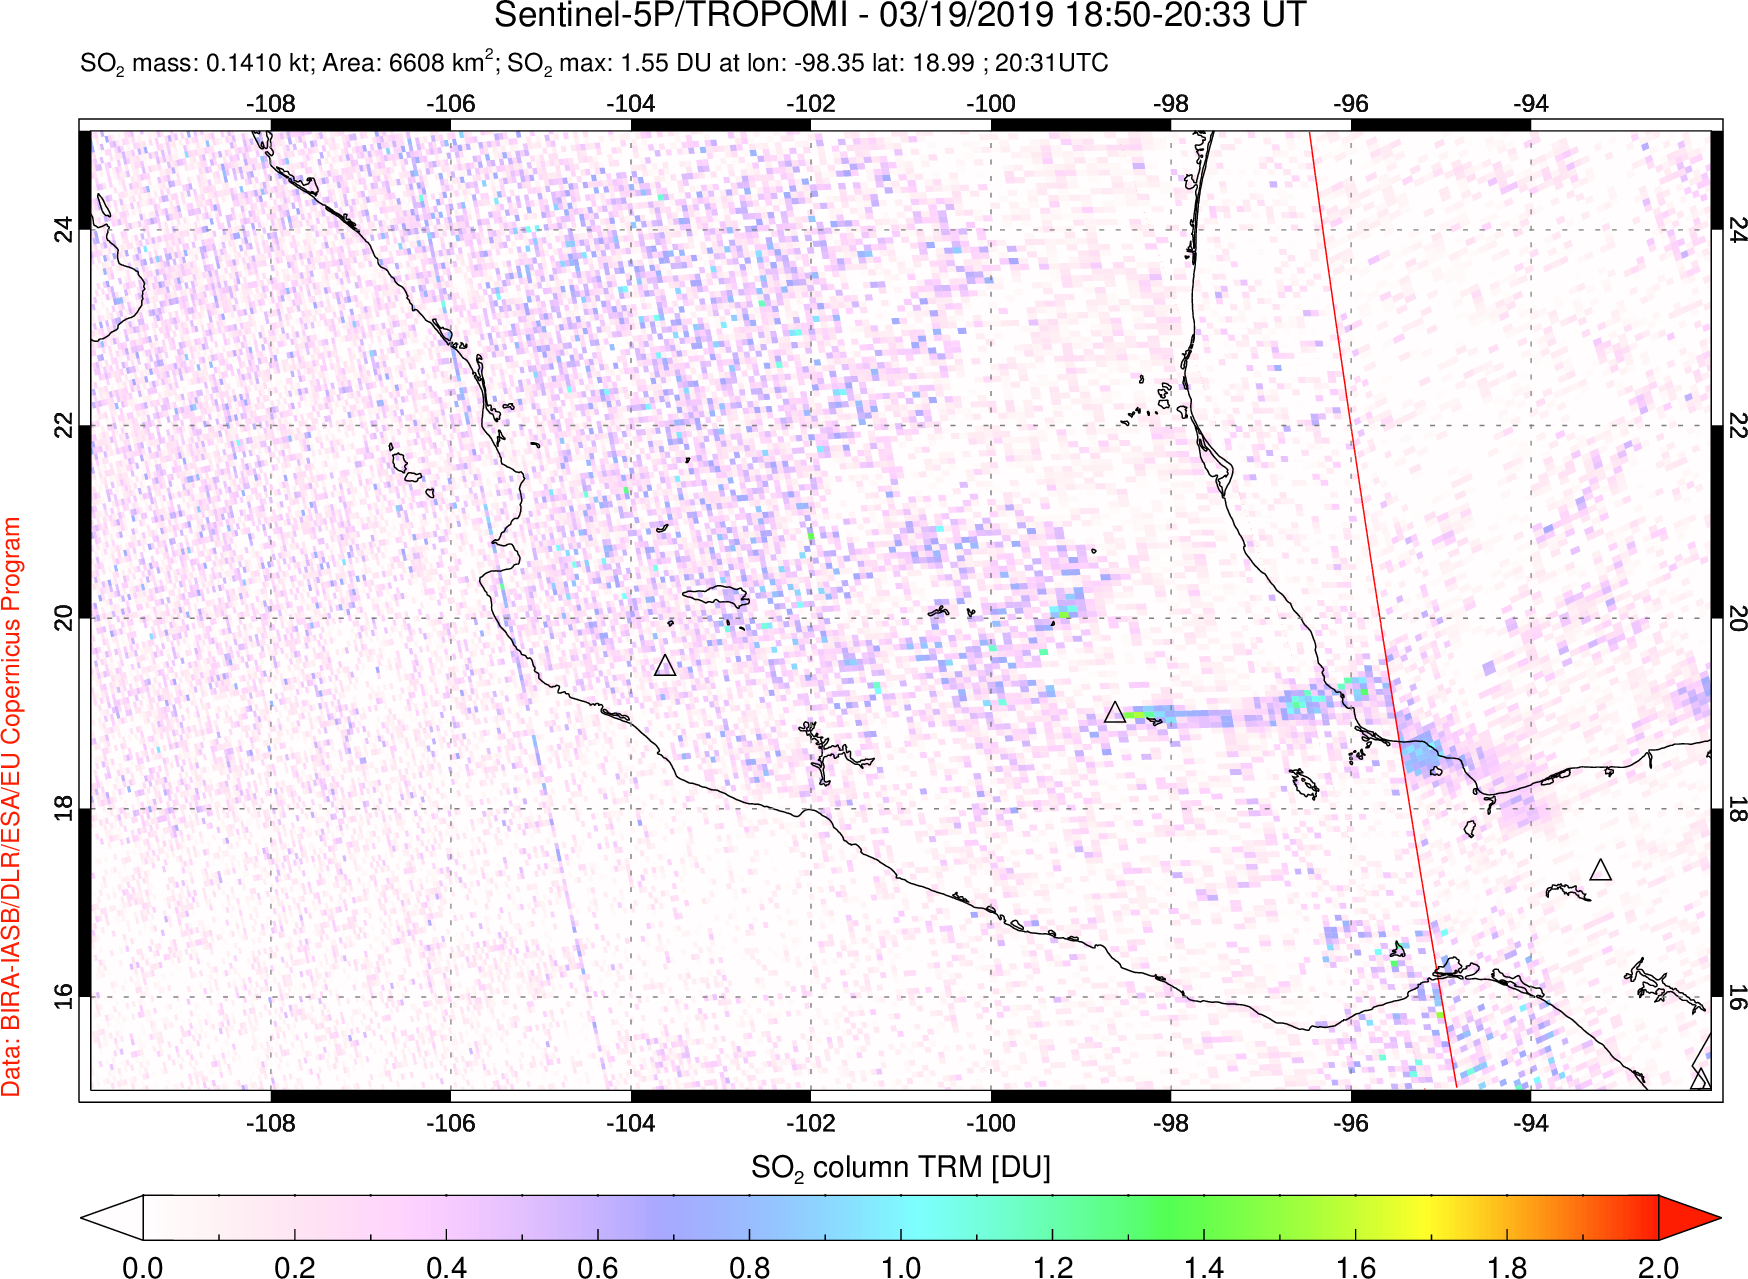 A sulfur dioxide image over Mexico on Mar 19, 2019.